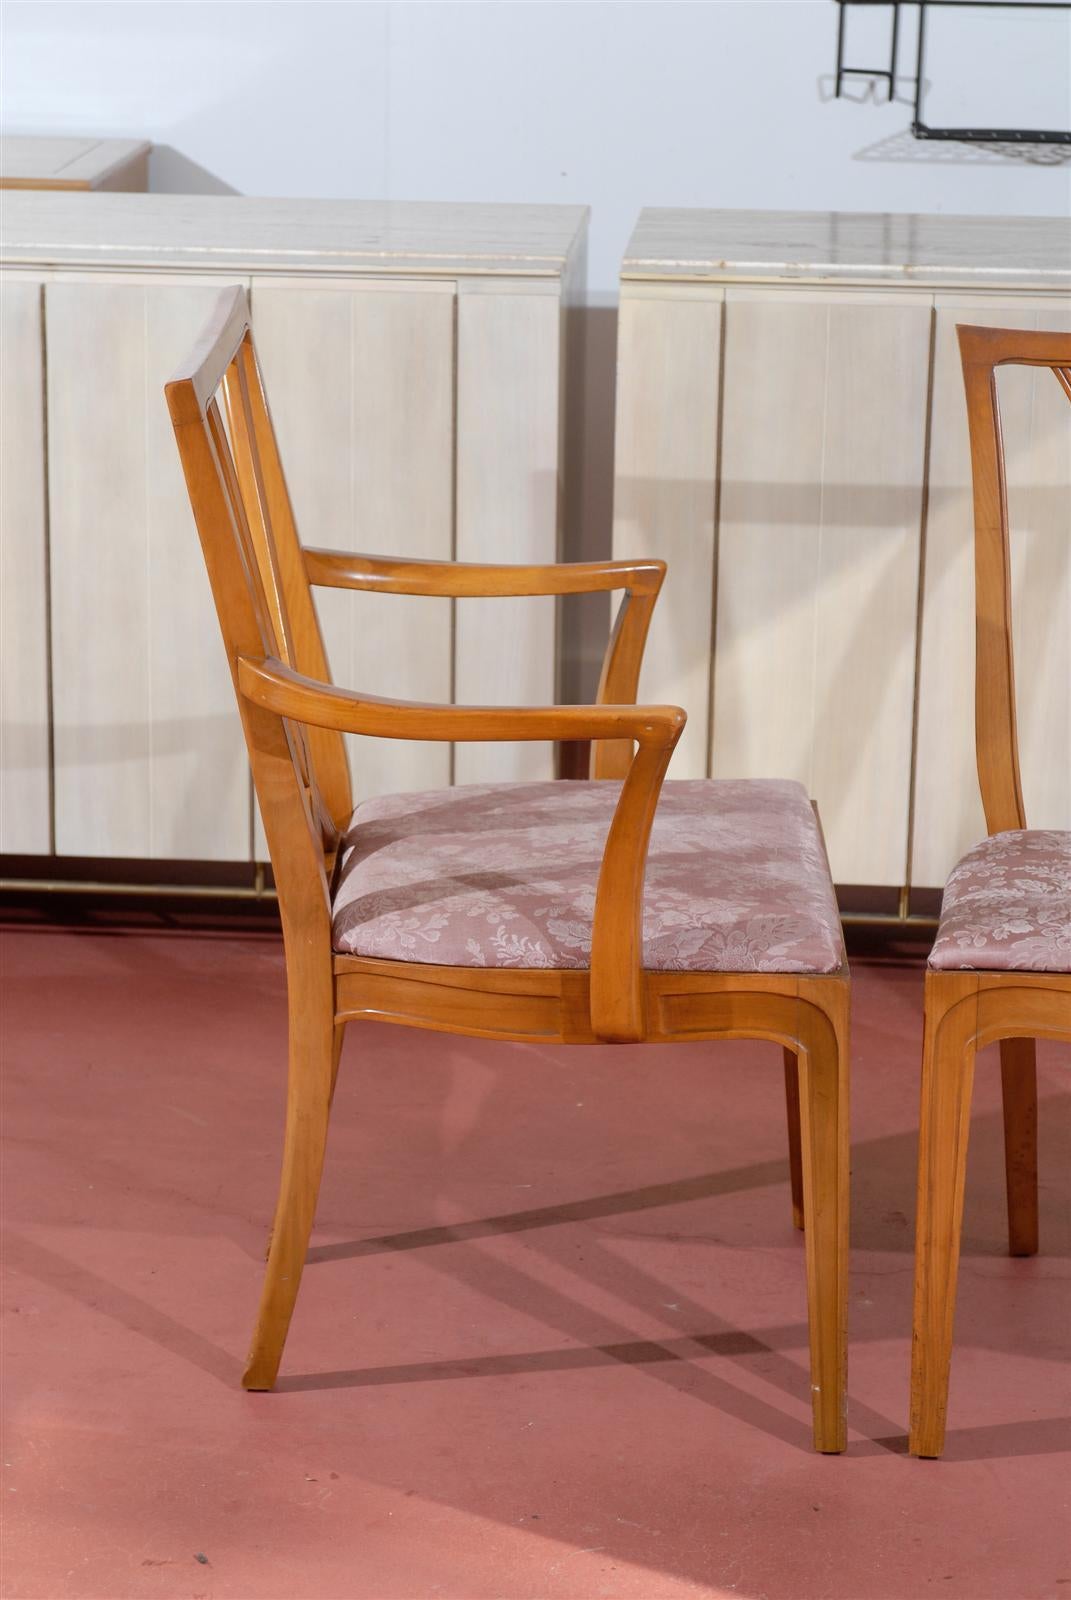 Maple Stunning Set of 8 Dining Chairs by Tomlinson, 1955 - Choice of Lacquer Color  For Sale